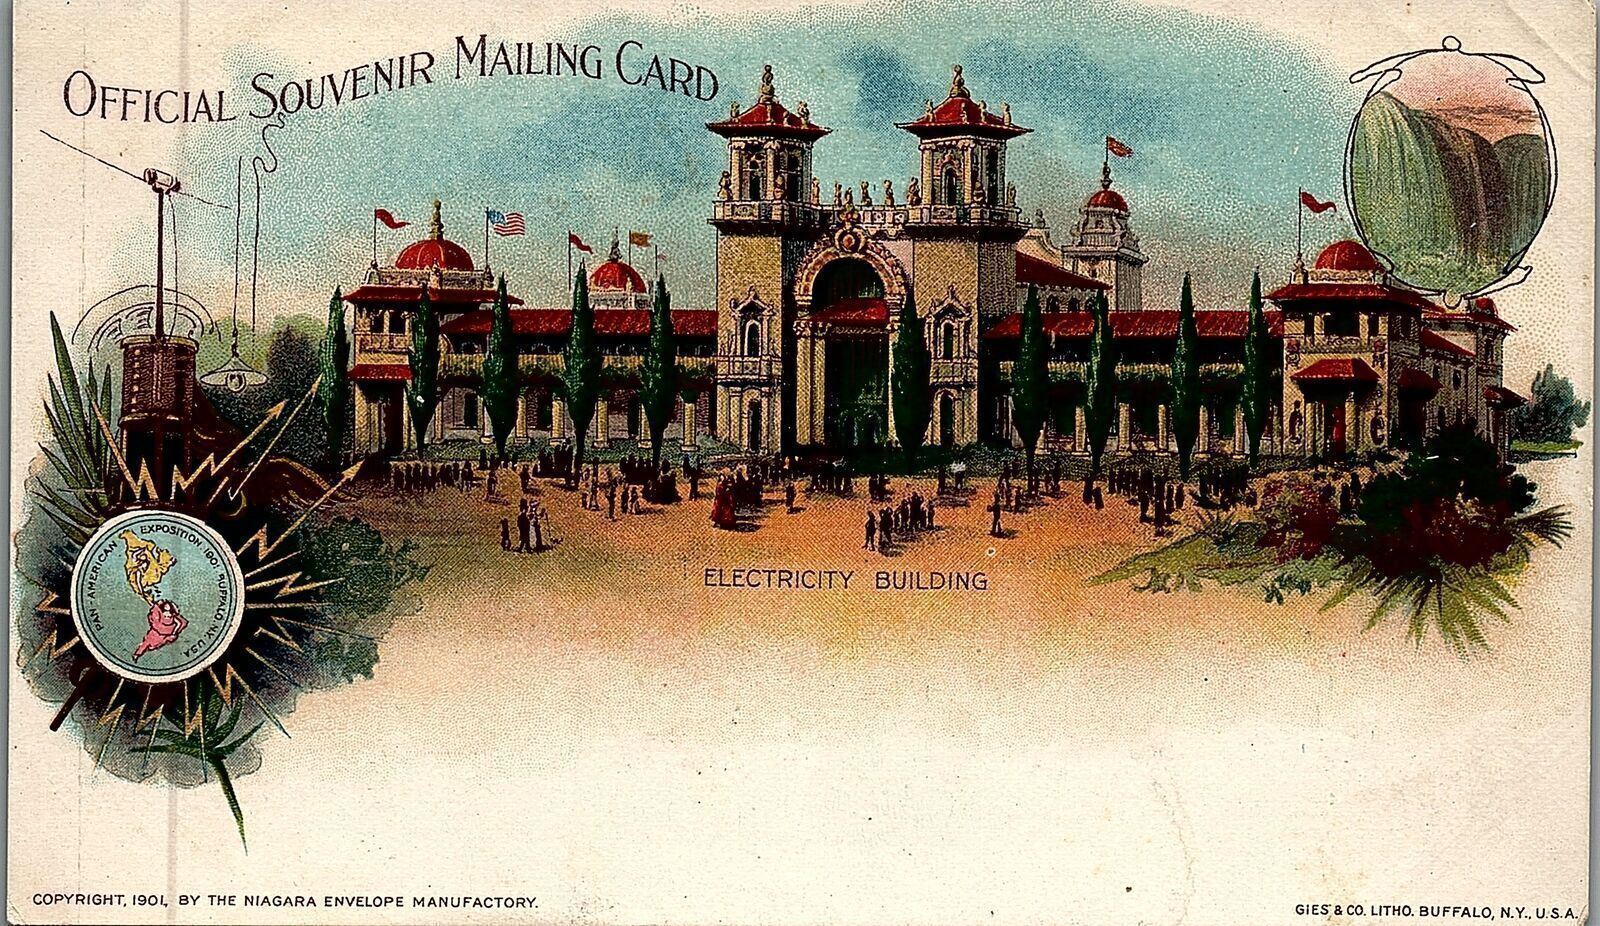 1901 PAN AMERICAN EXPOSITION BUFFALO ELECTRICITY BUILDING MAILING CARD 25-100